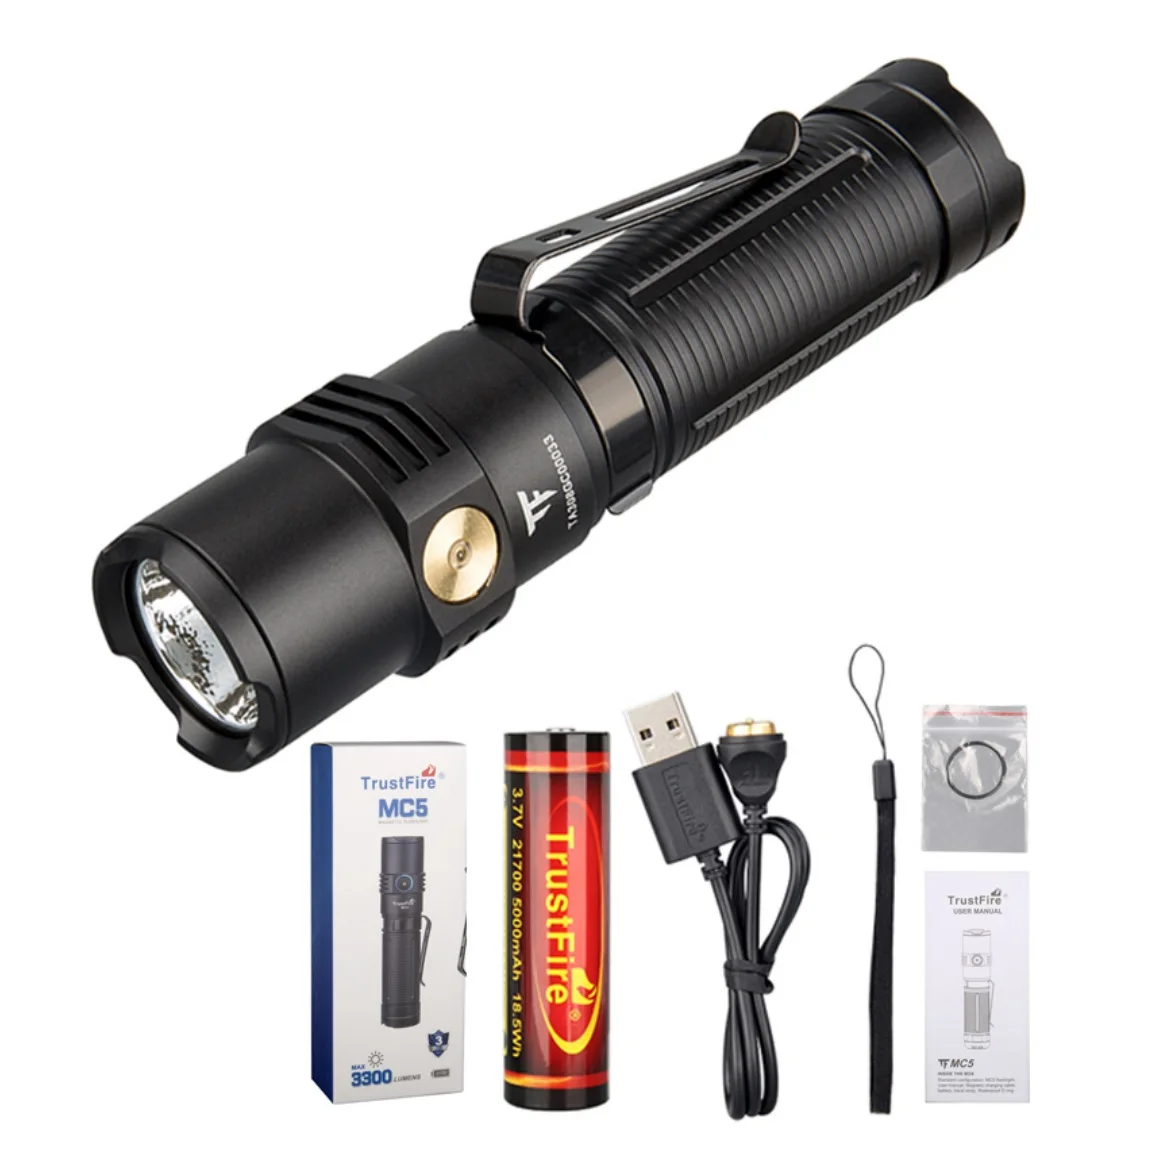 

Trustfire MC5 EDC Power Torch Lighter 3300LM Rechargeable Led Flashlights With Magnetic +21700 Battery for Self Defense Hiking